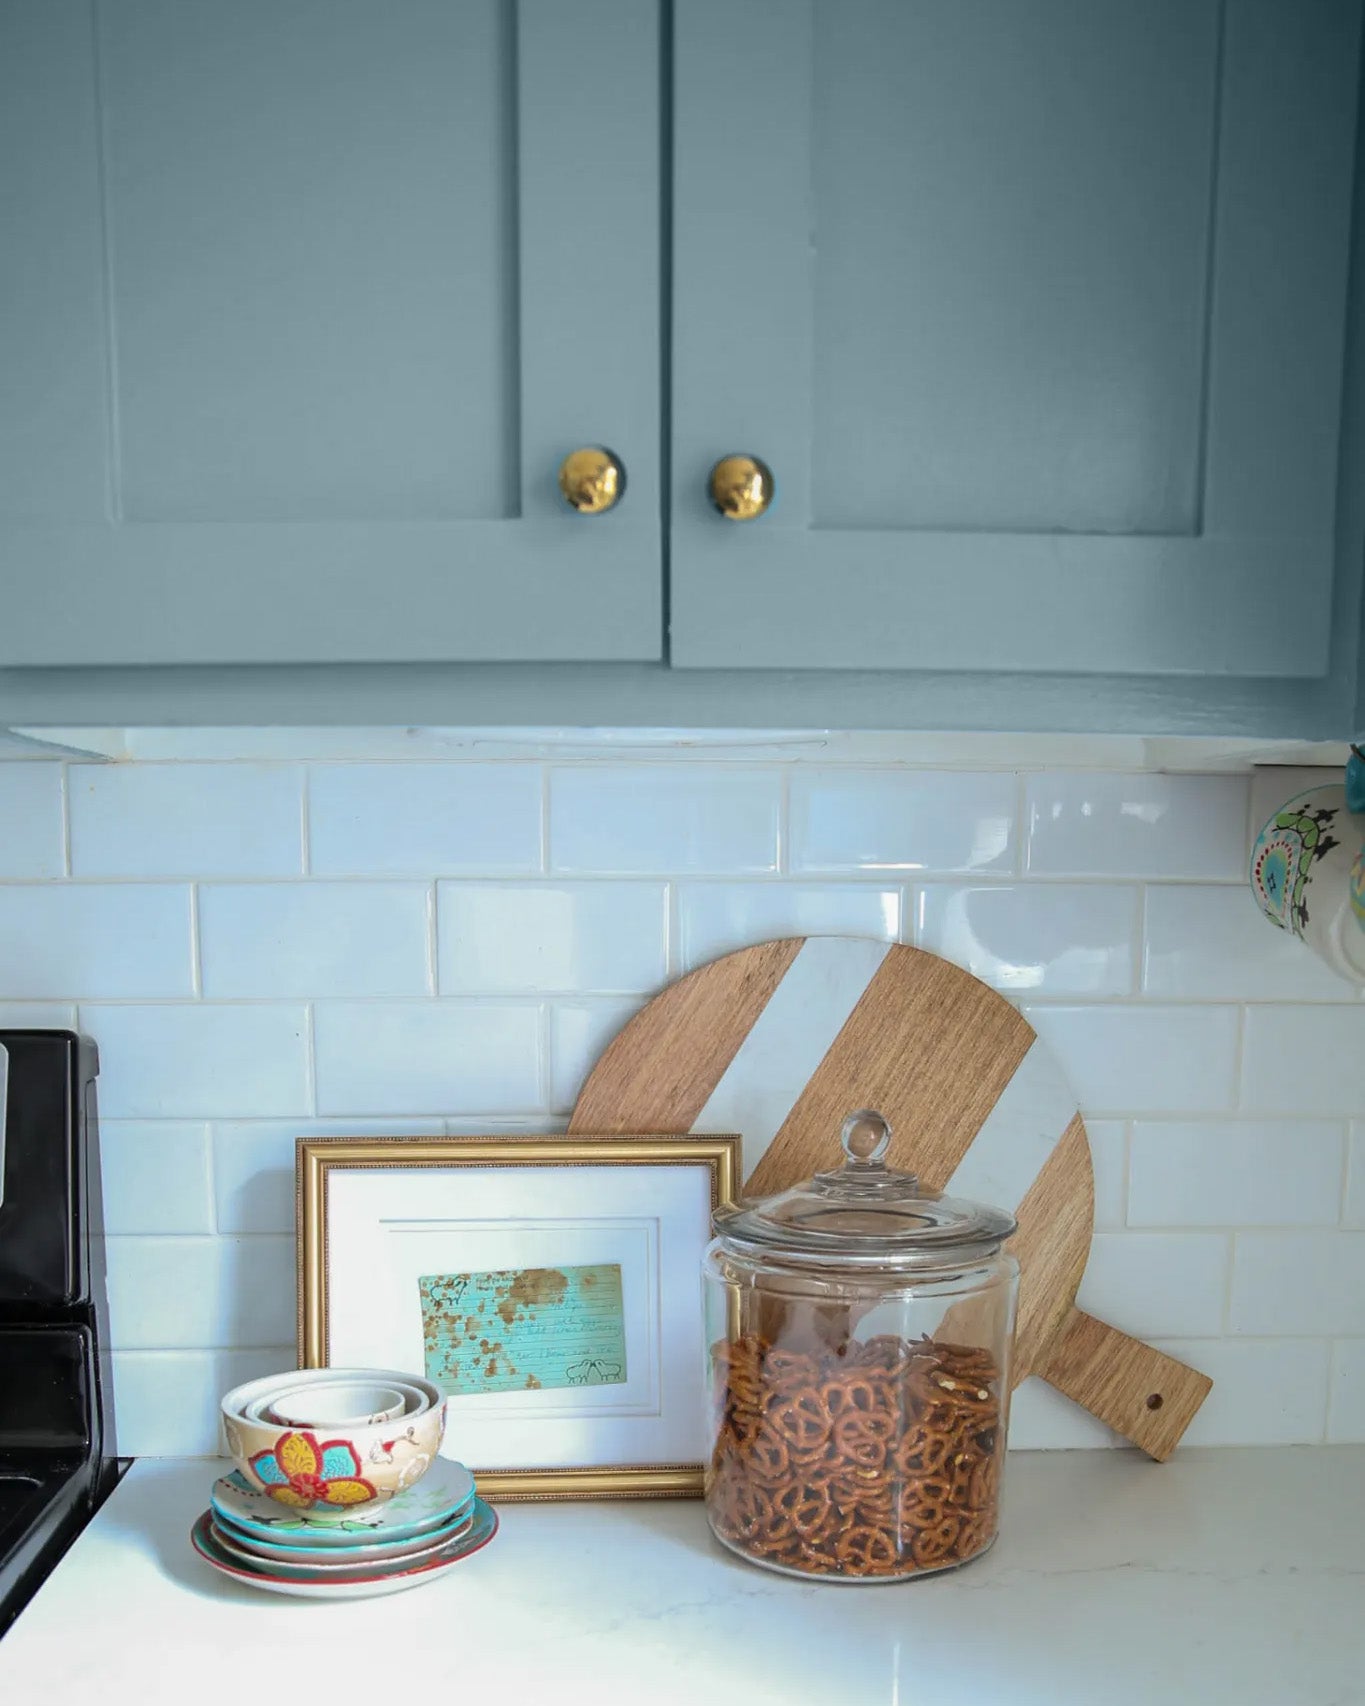 These Blue Kitchen Cabinets are Coastal Grandmother Perfection. And they’re proof you don’t need to spend a ton to refresh your space. Here’s how to pull off a budget-friendly refresh with blue kitchen cabinets.